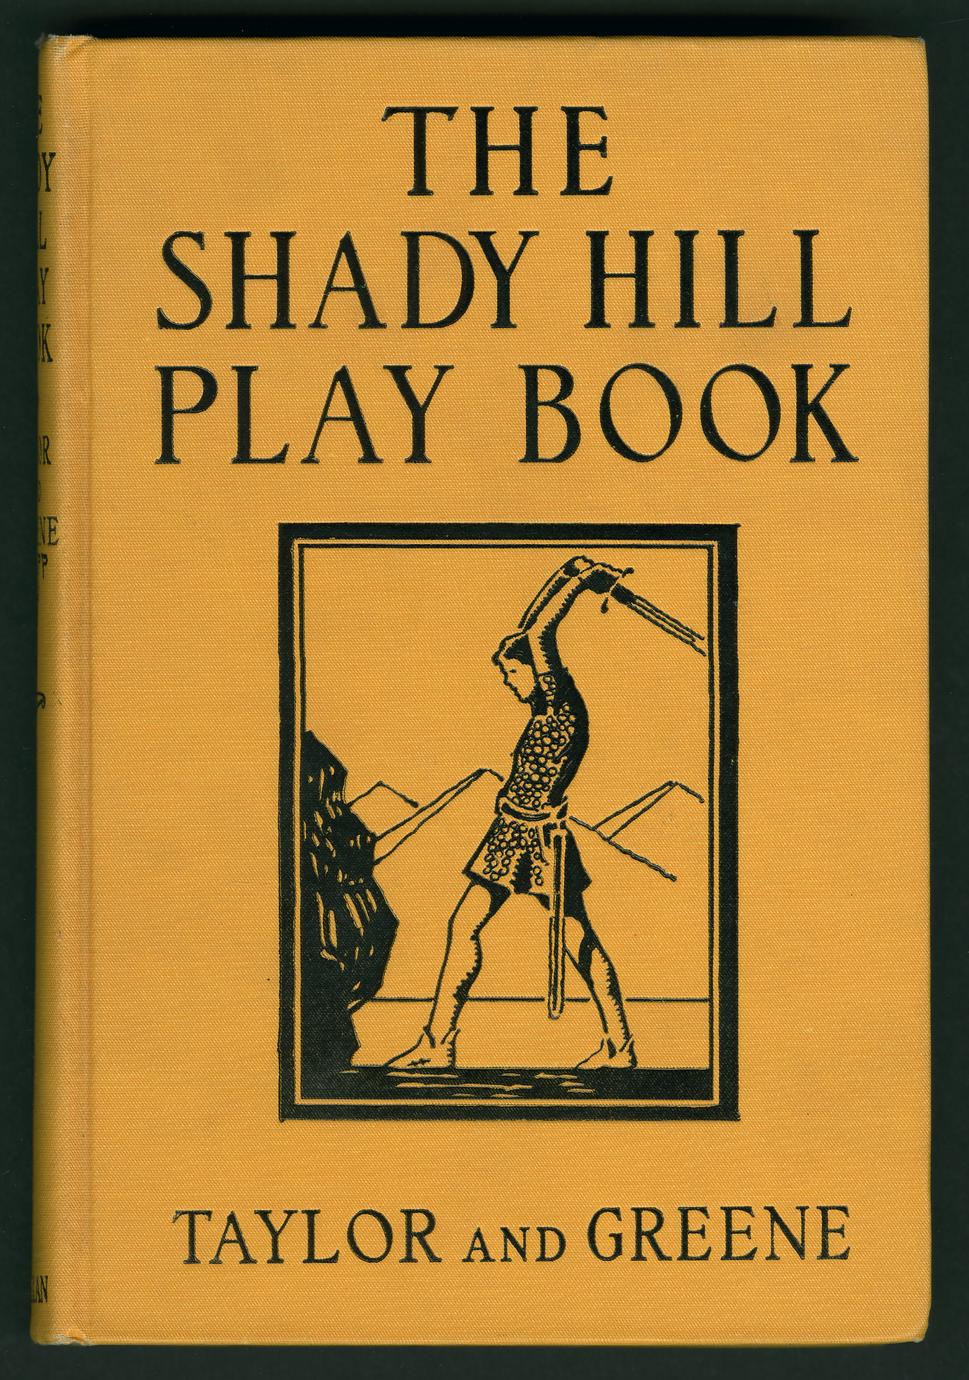 The shady hill play book (1 of 2)